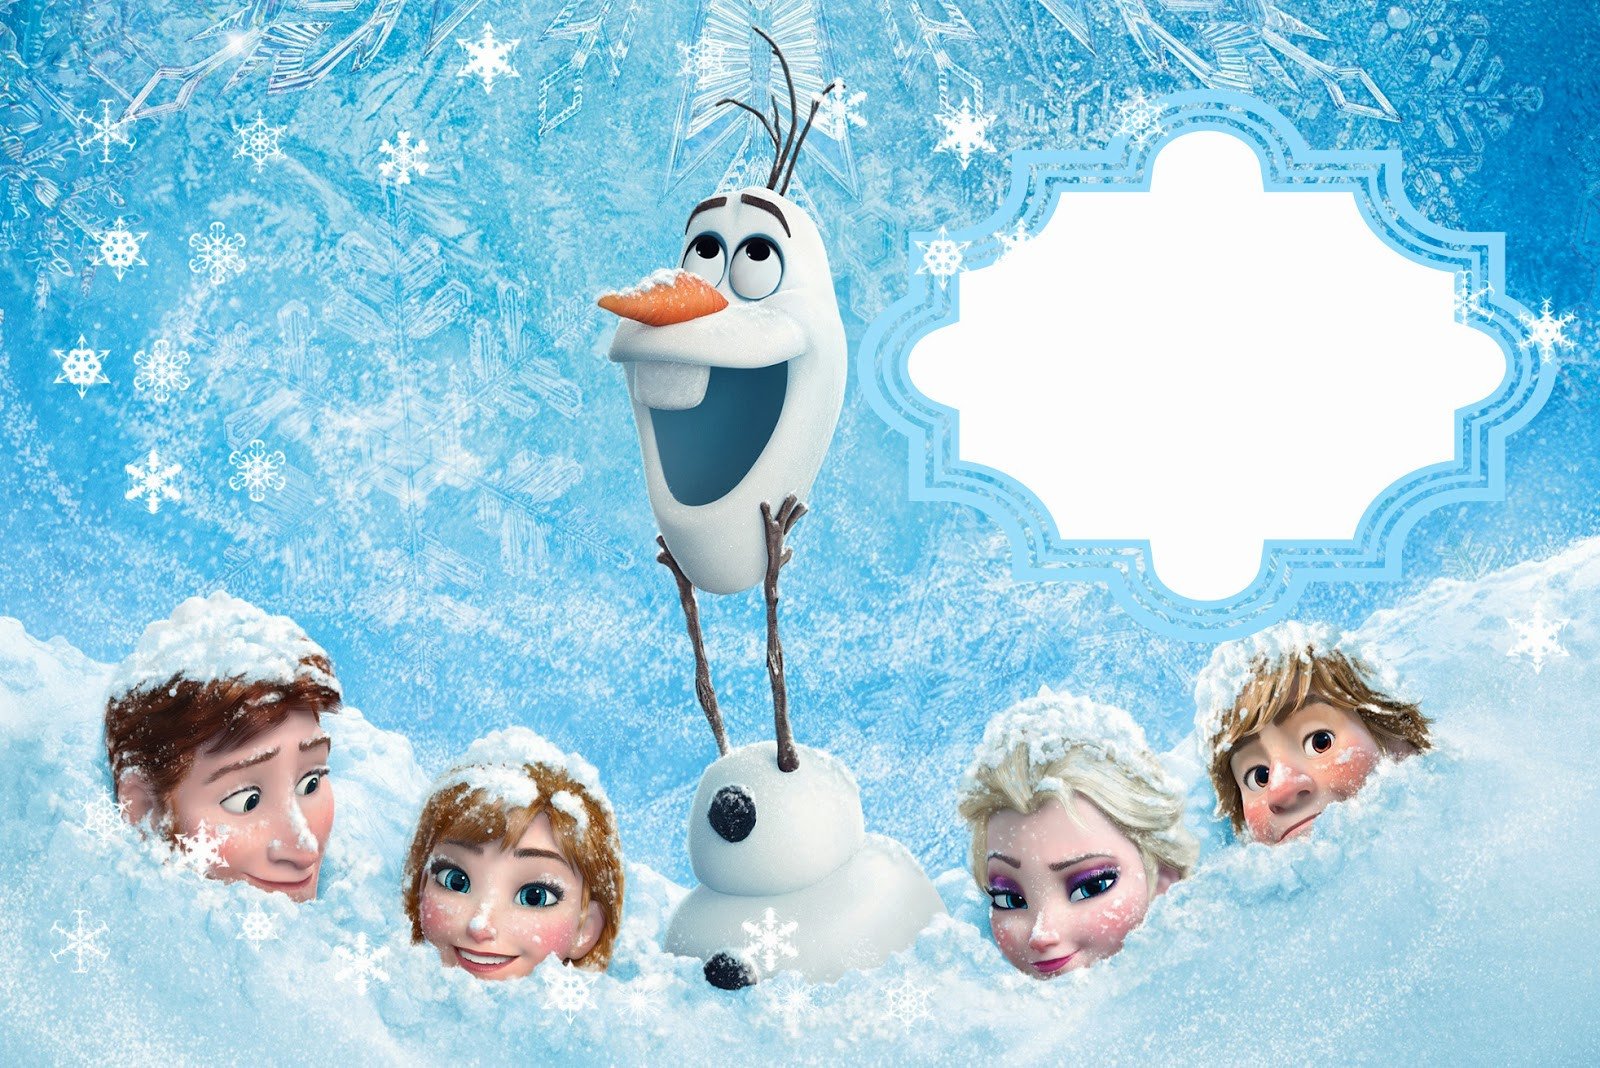 Frozen Free Printable Cards or Party Invitations